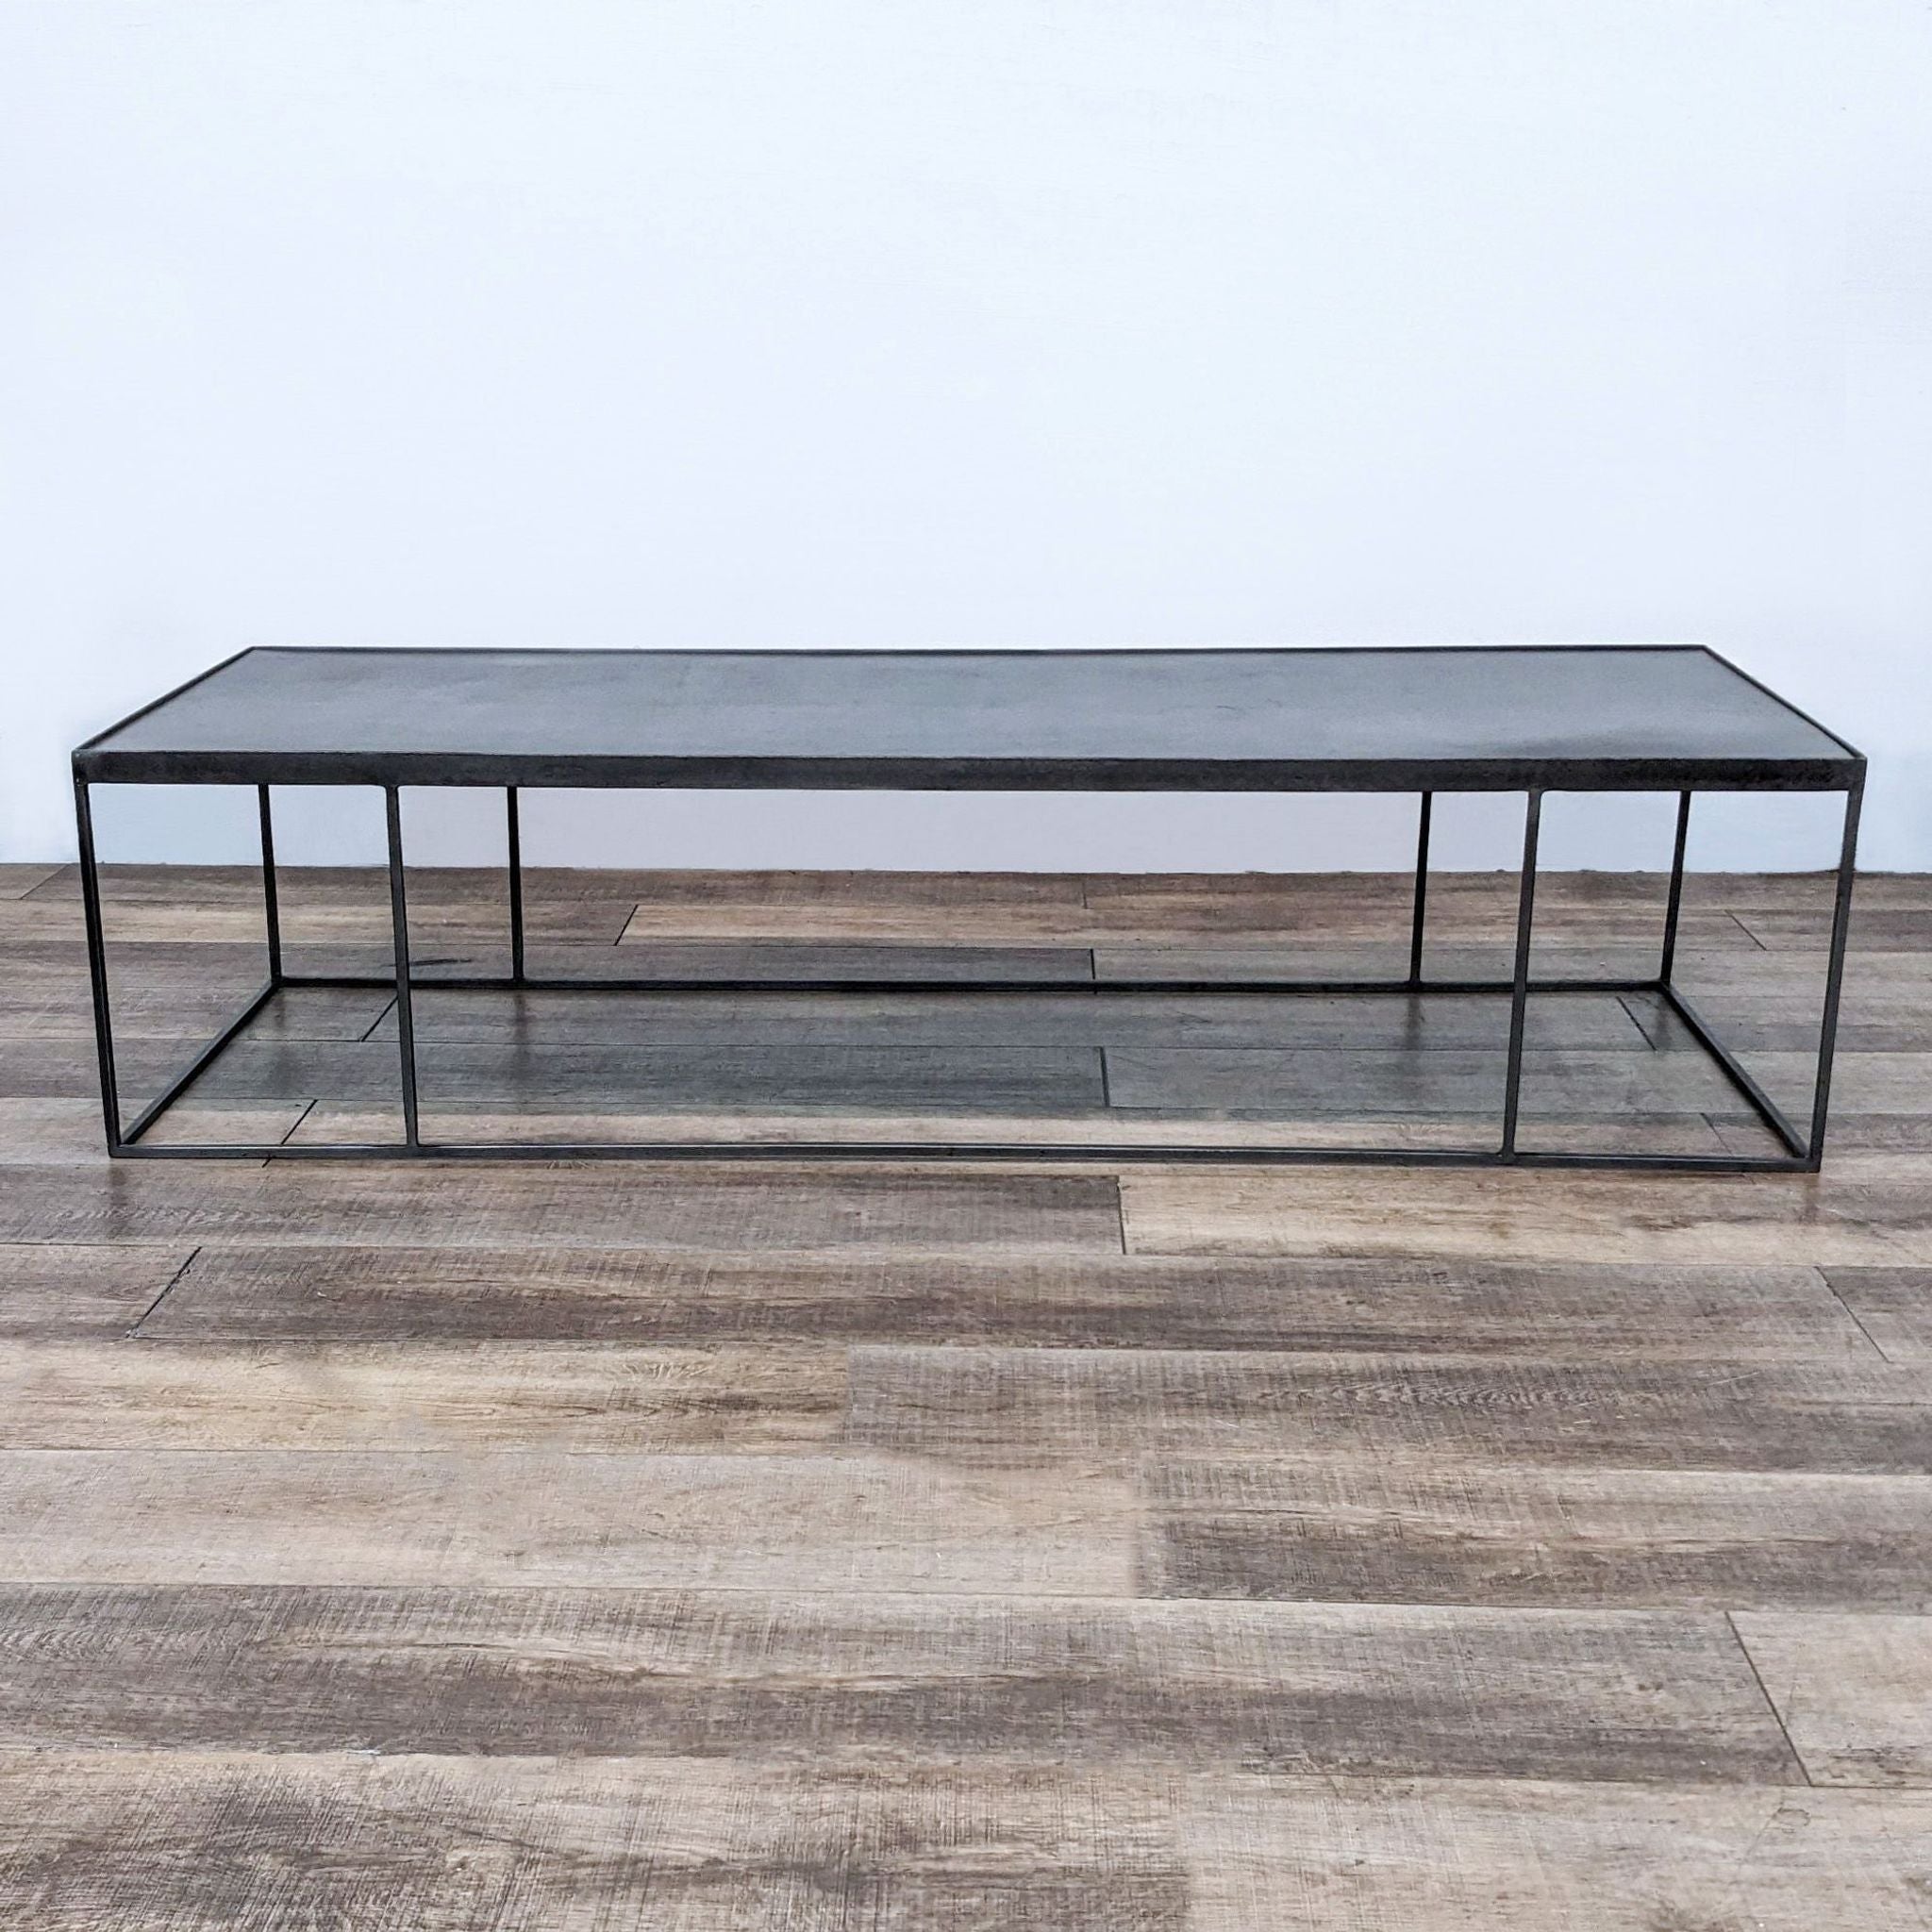 Reperch brand coffee table with a minimalist metal frame and a grey top against a neutral background.